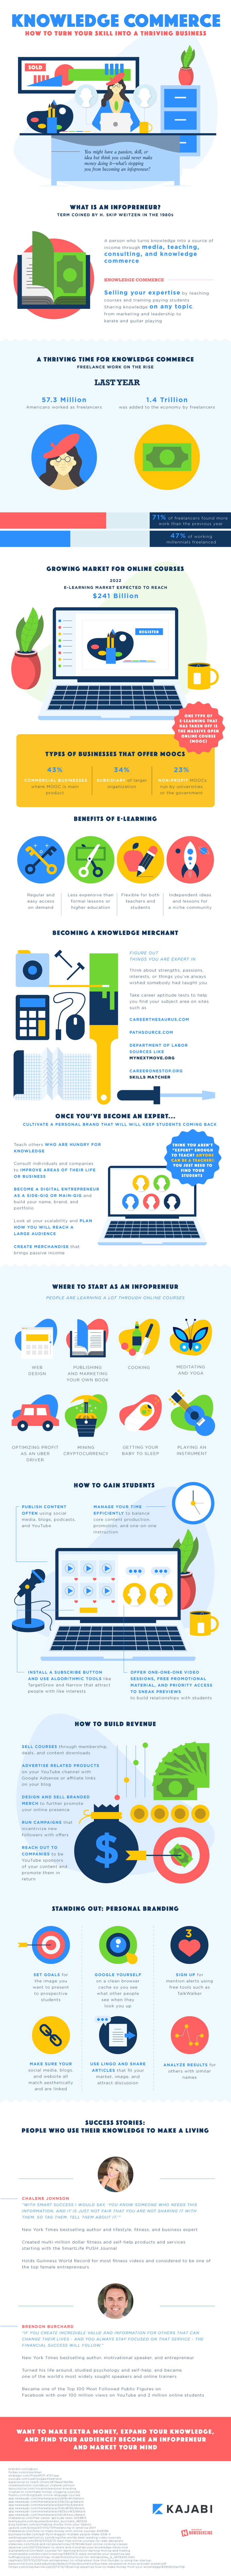 Knowledge Commerce Be An Infopraneur And Bring Your Skills To Life - skill or passion that you never thought could make money you may be wrong check out this infographic to learn how becoming an infopreneur could turn